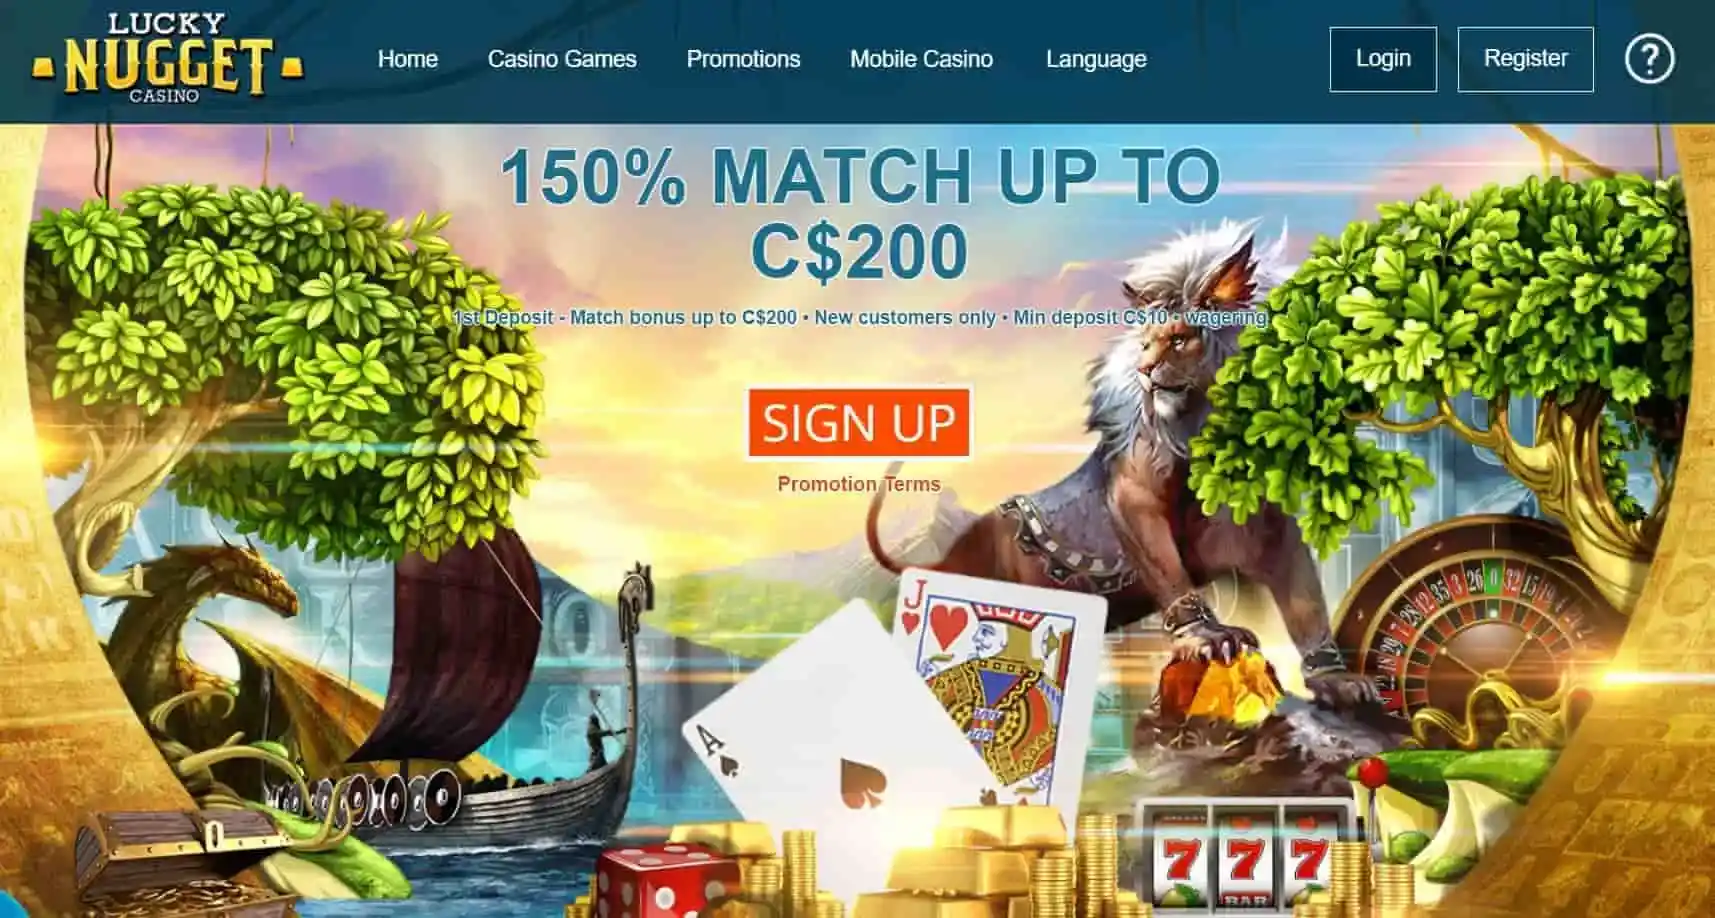 Lucky-Nugget-Casino-main-page